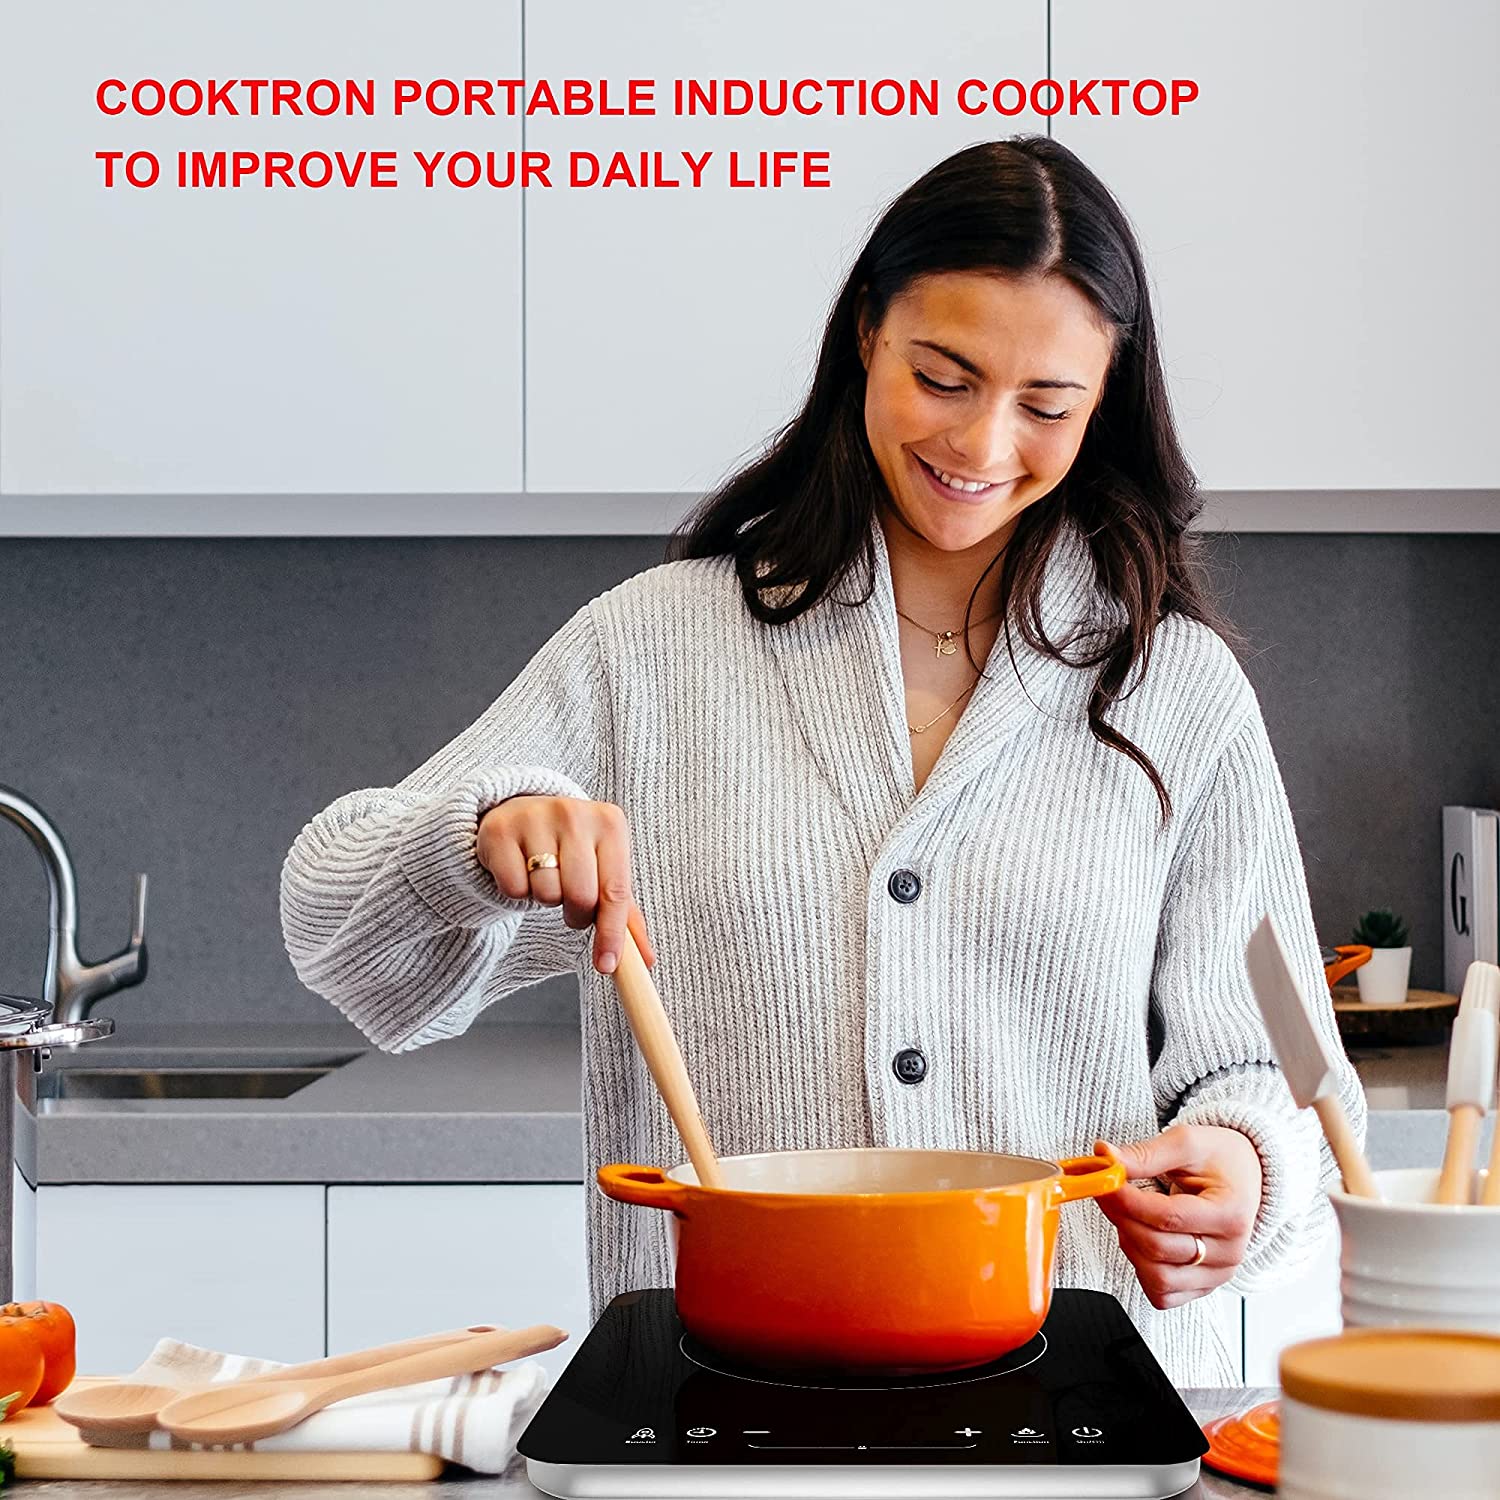 Induction Cooktop. Top 10 Gift Ideas For 70 Years Old Woman in Birthday - 4